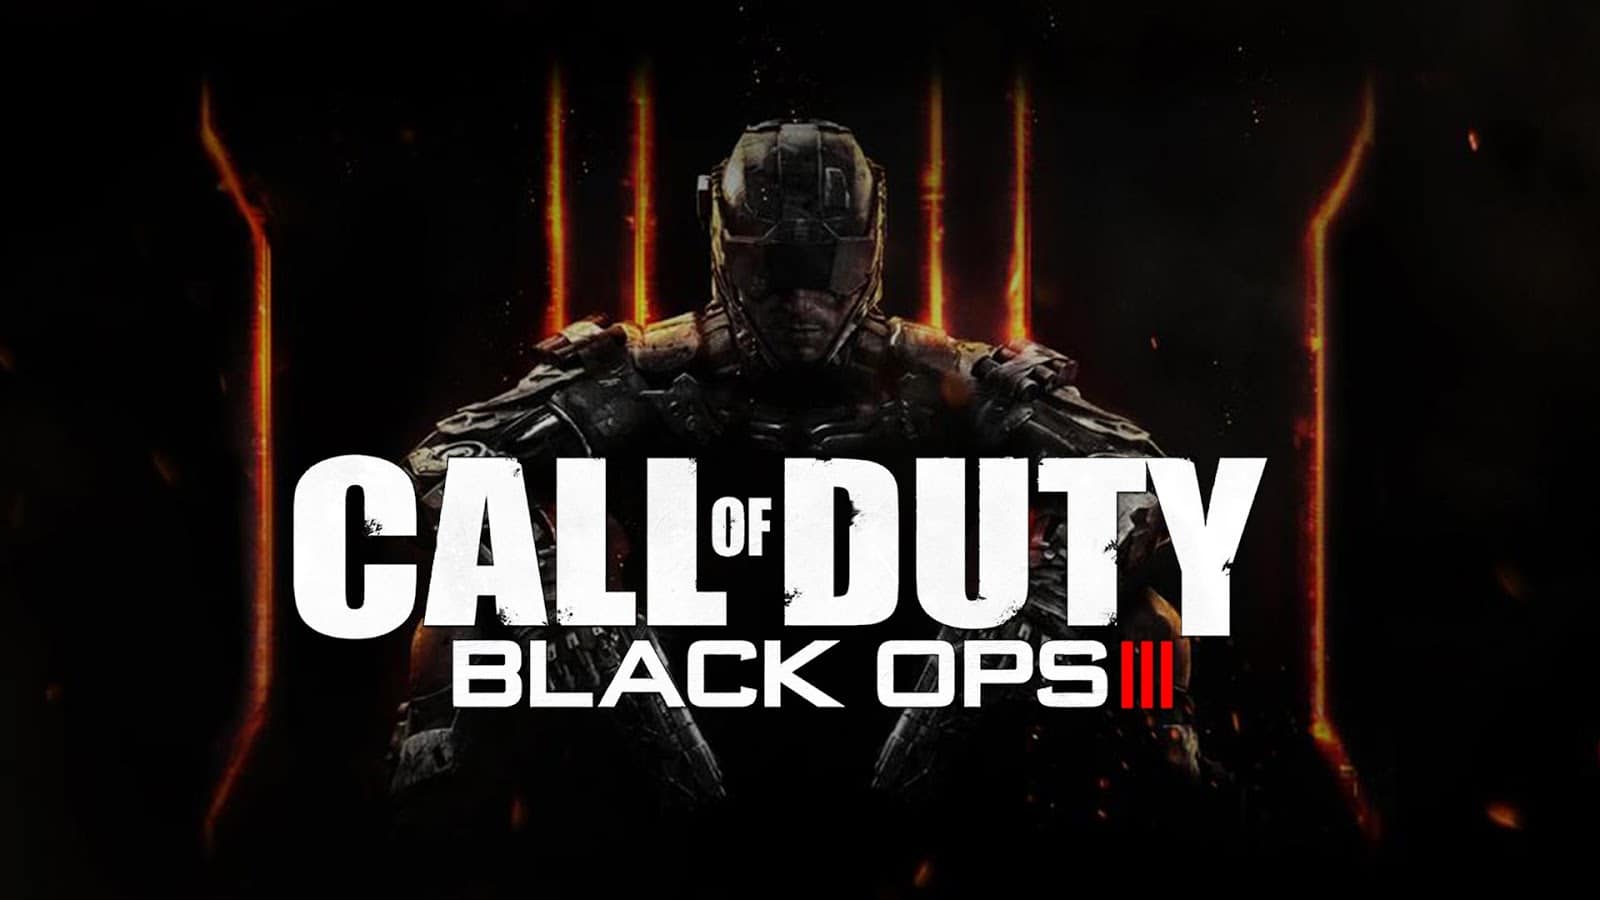 Best Selling PS4 Games - Call of Duty Black Ops III